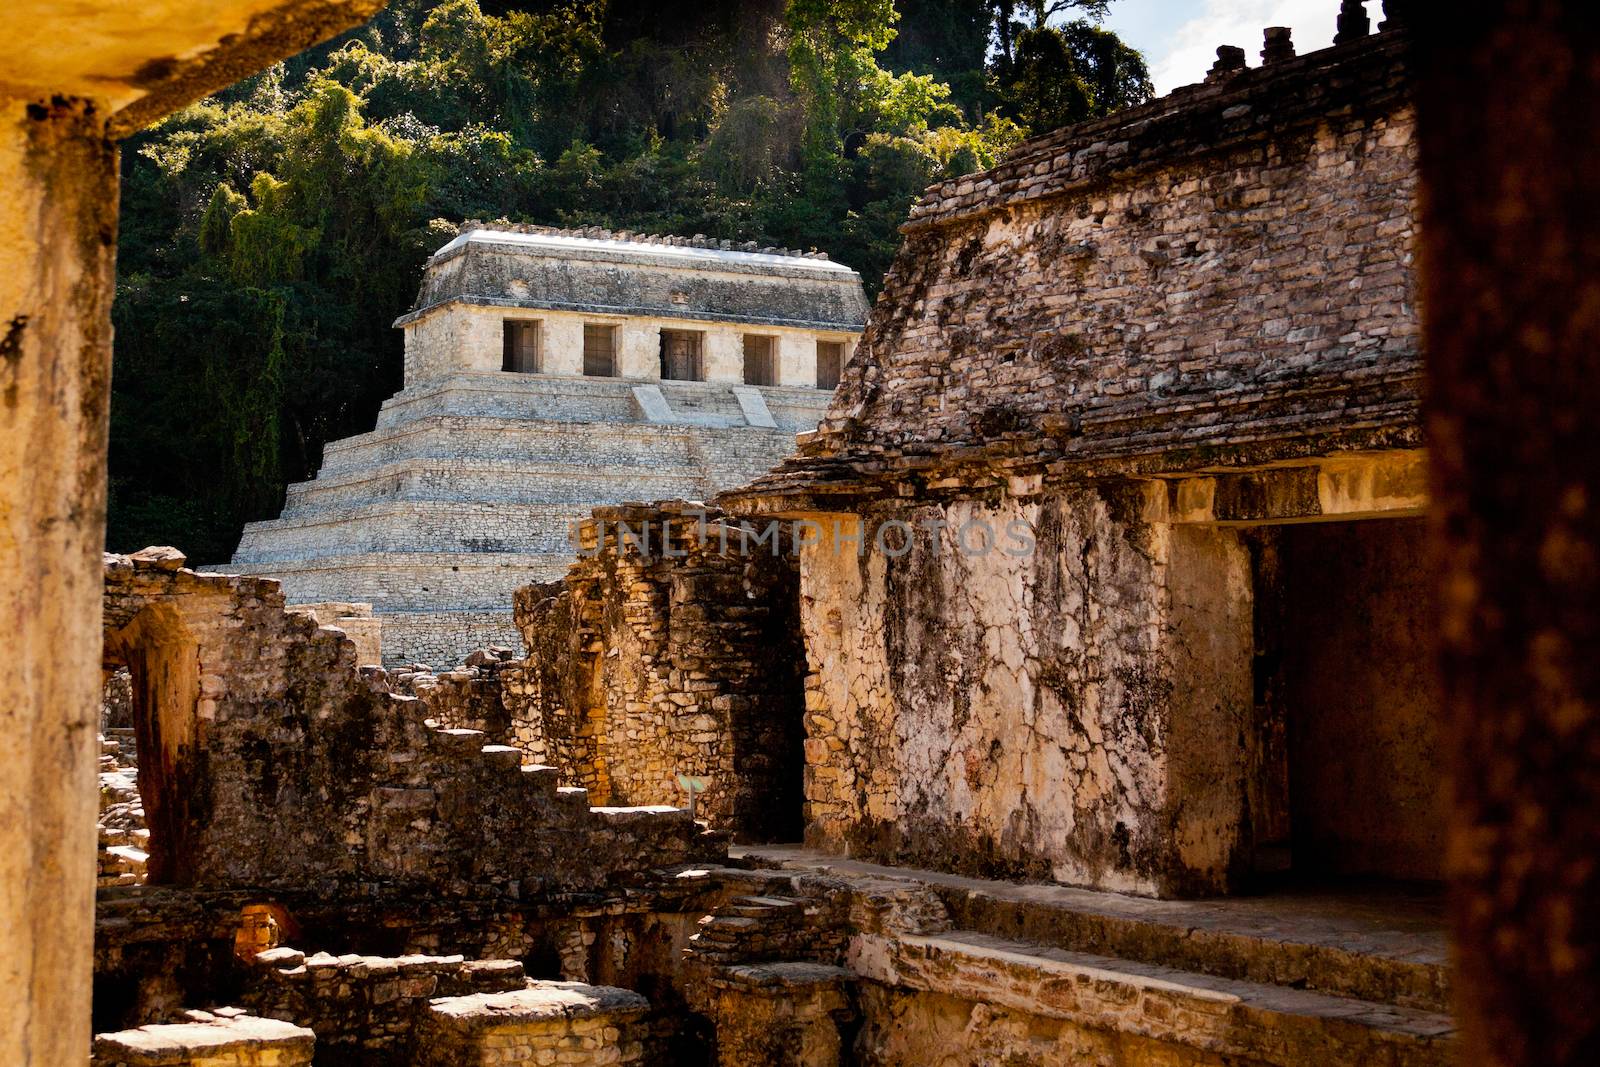 Temple of Palenque, an ancient mayan ruin, located in Palenque, Yucatan, Mexico